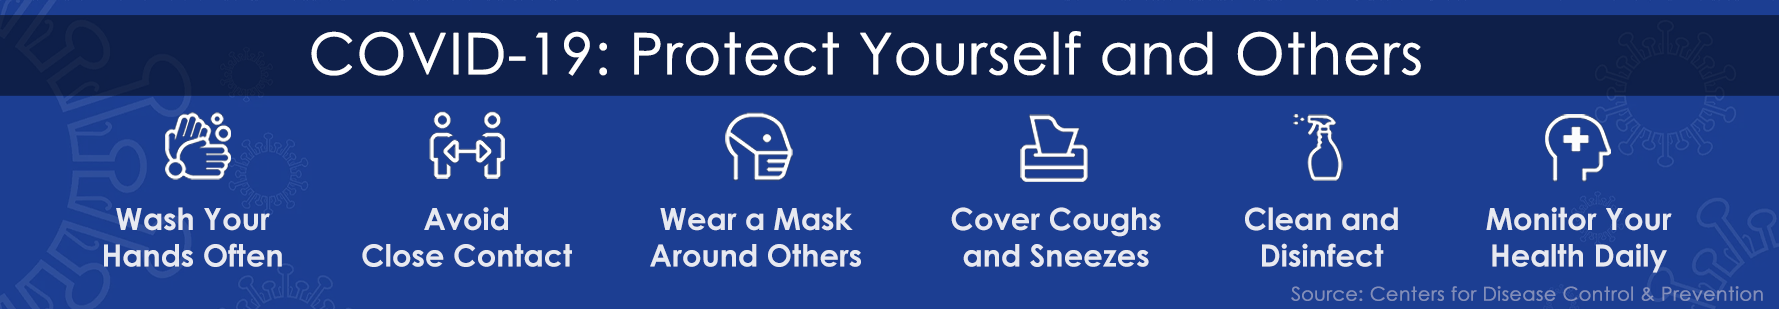 Protect Yourself and Others, click for more information from the CDC